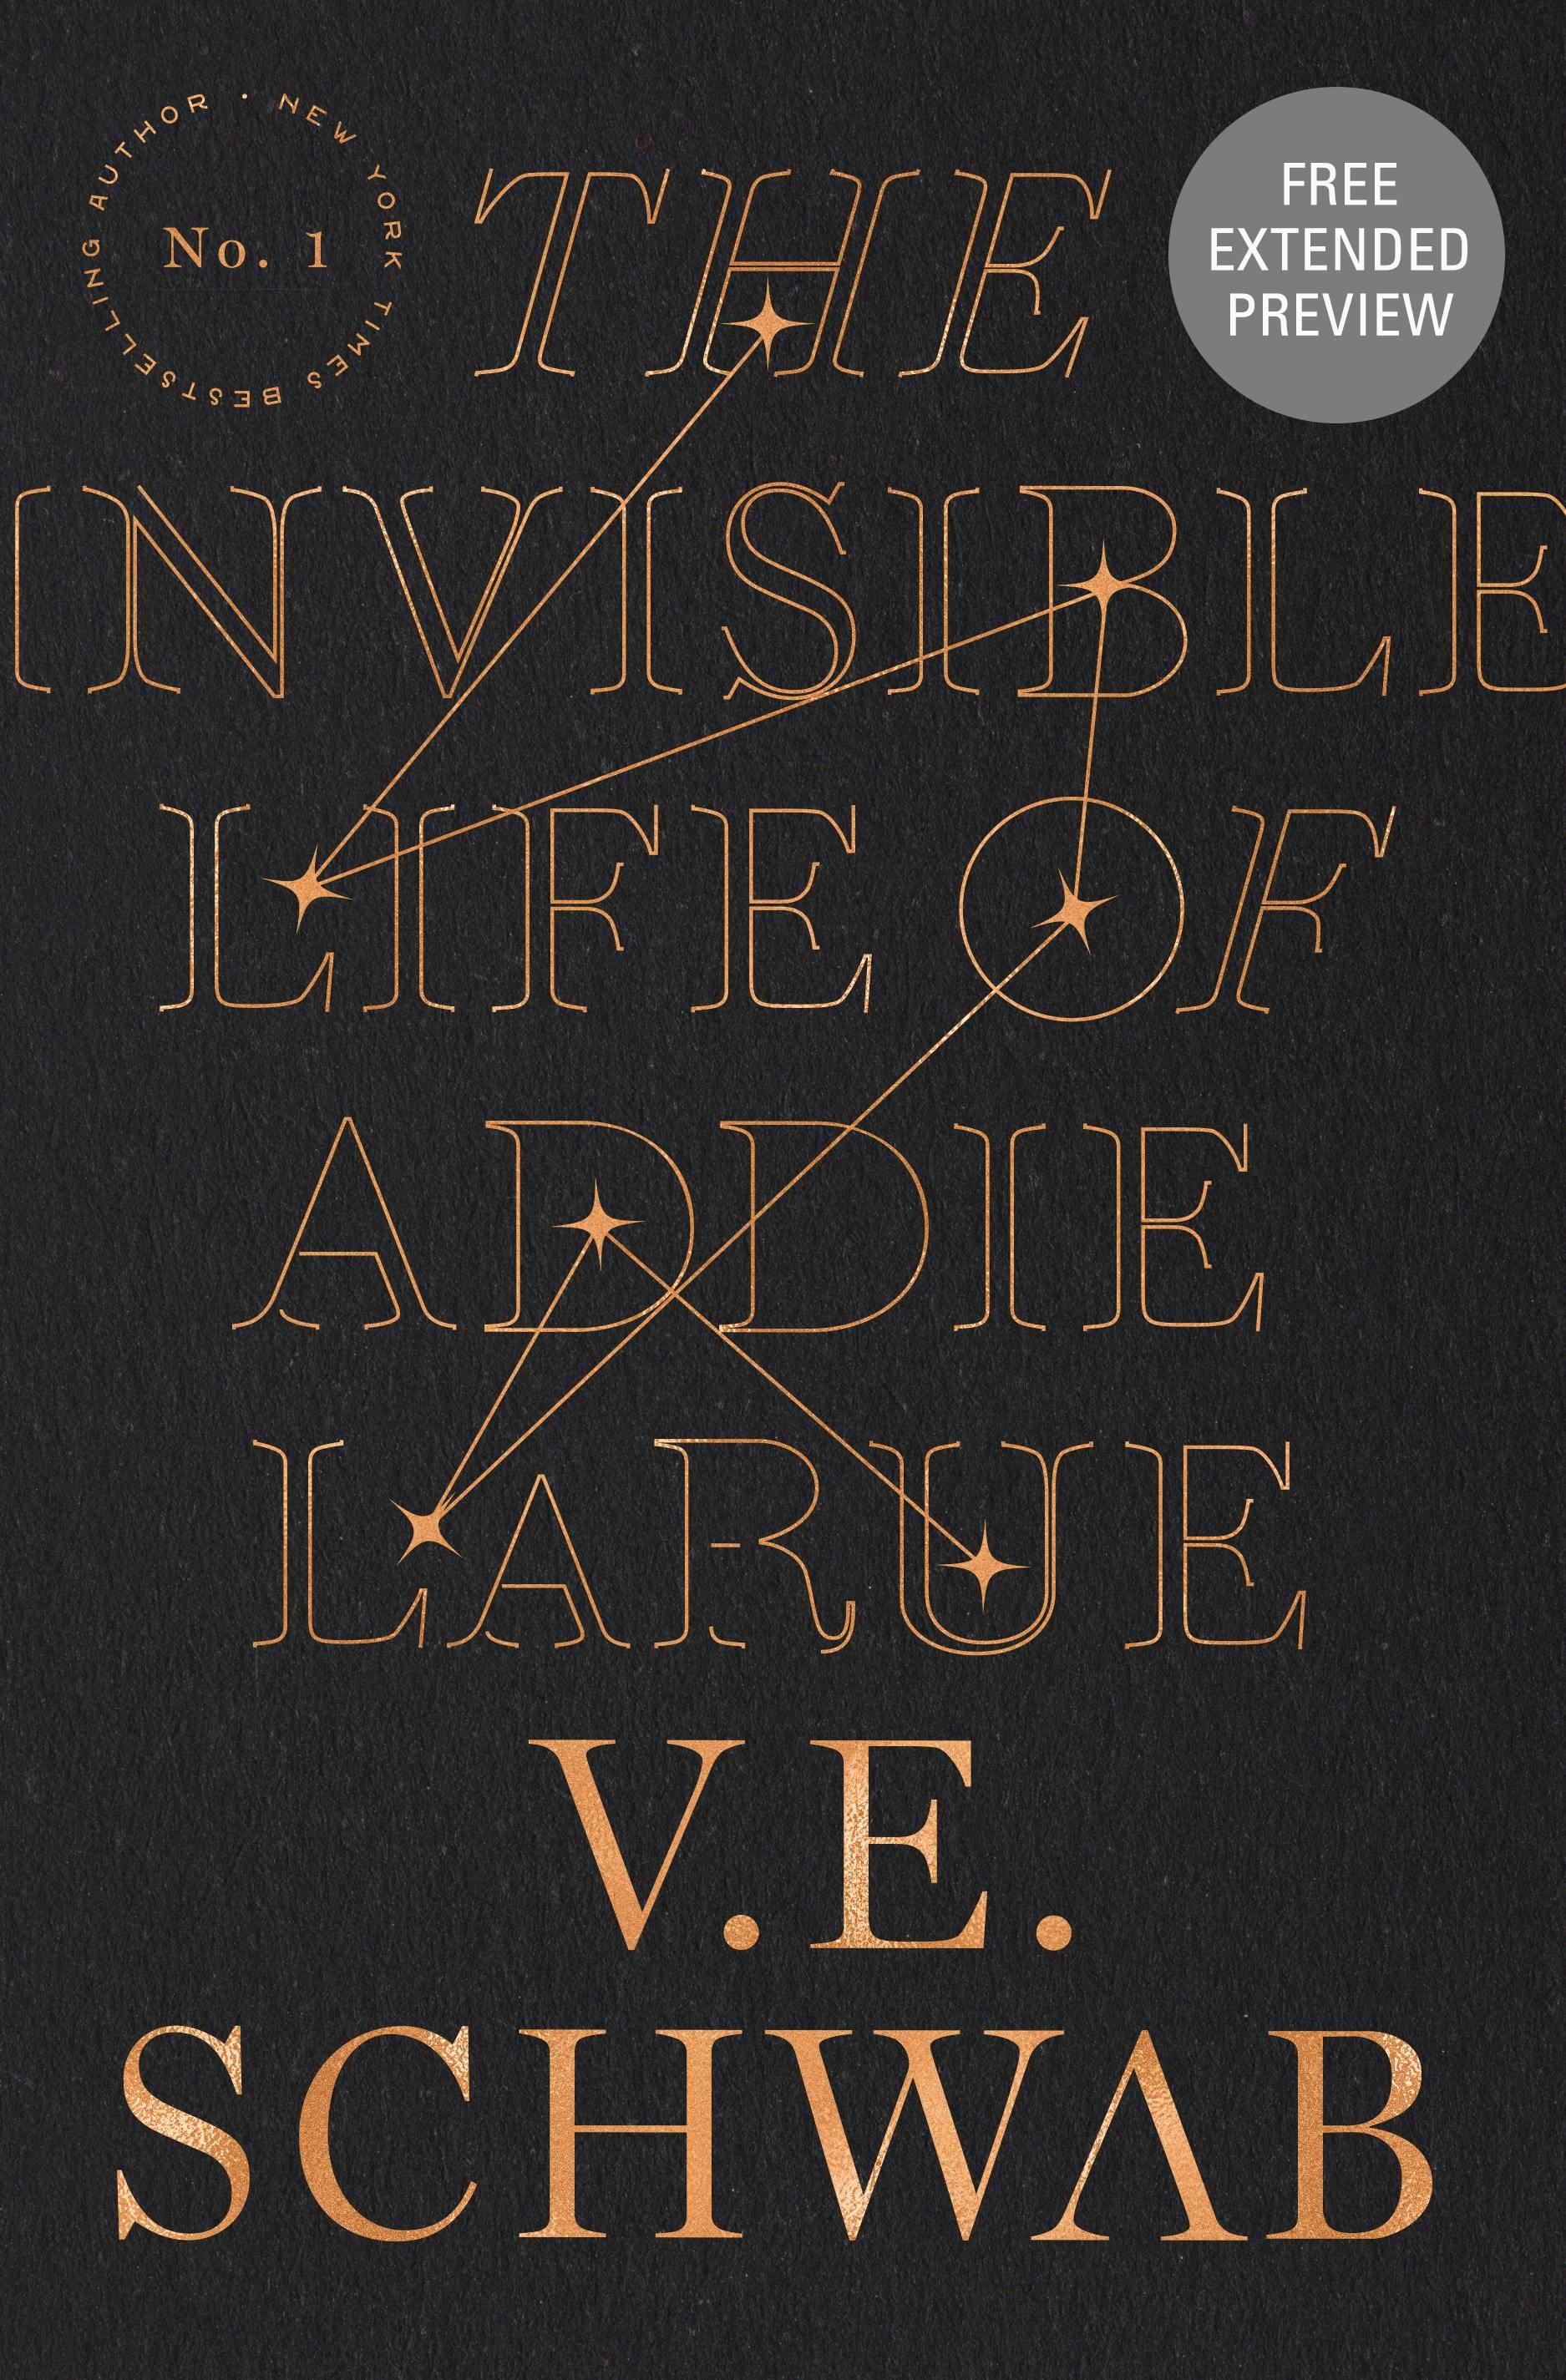 Cover for the book titled as: The Invisible Life of Addie LaRue Sneak Peek